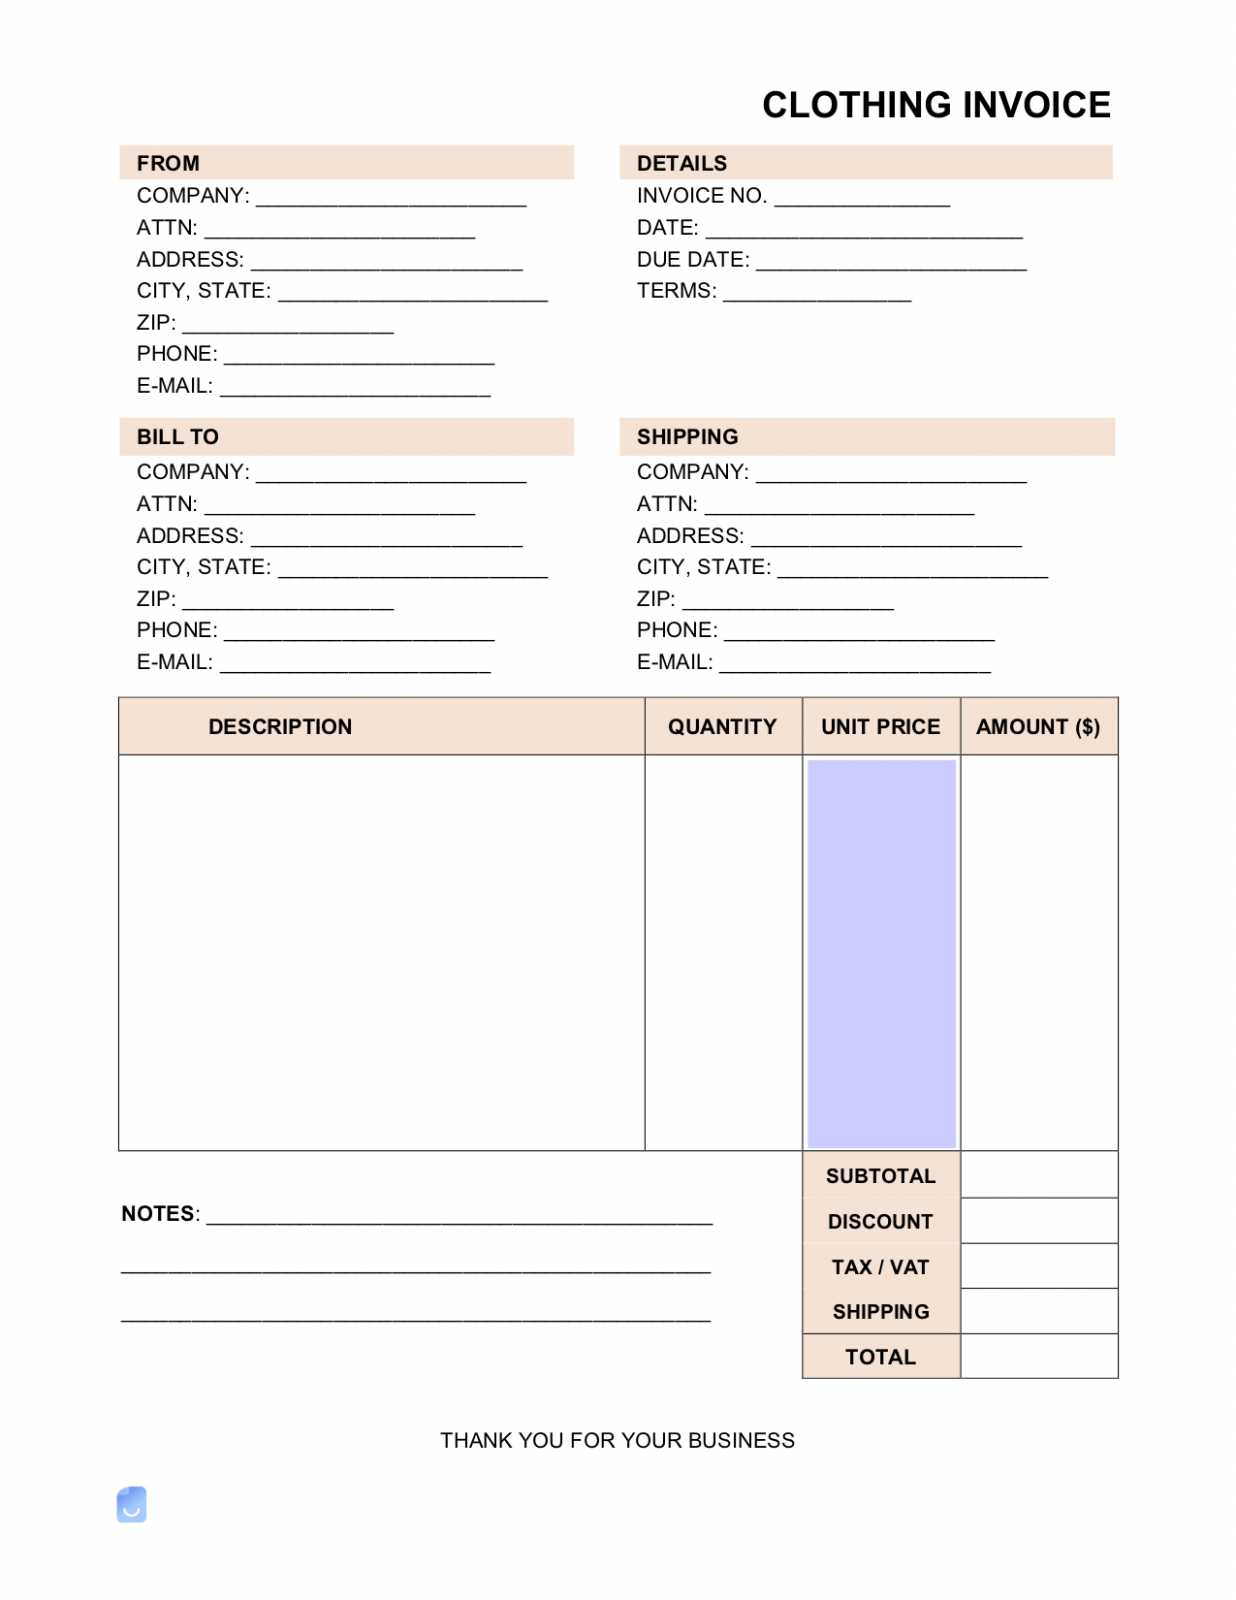 Printable Garments Invoice Template Excel